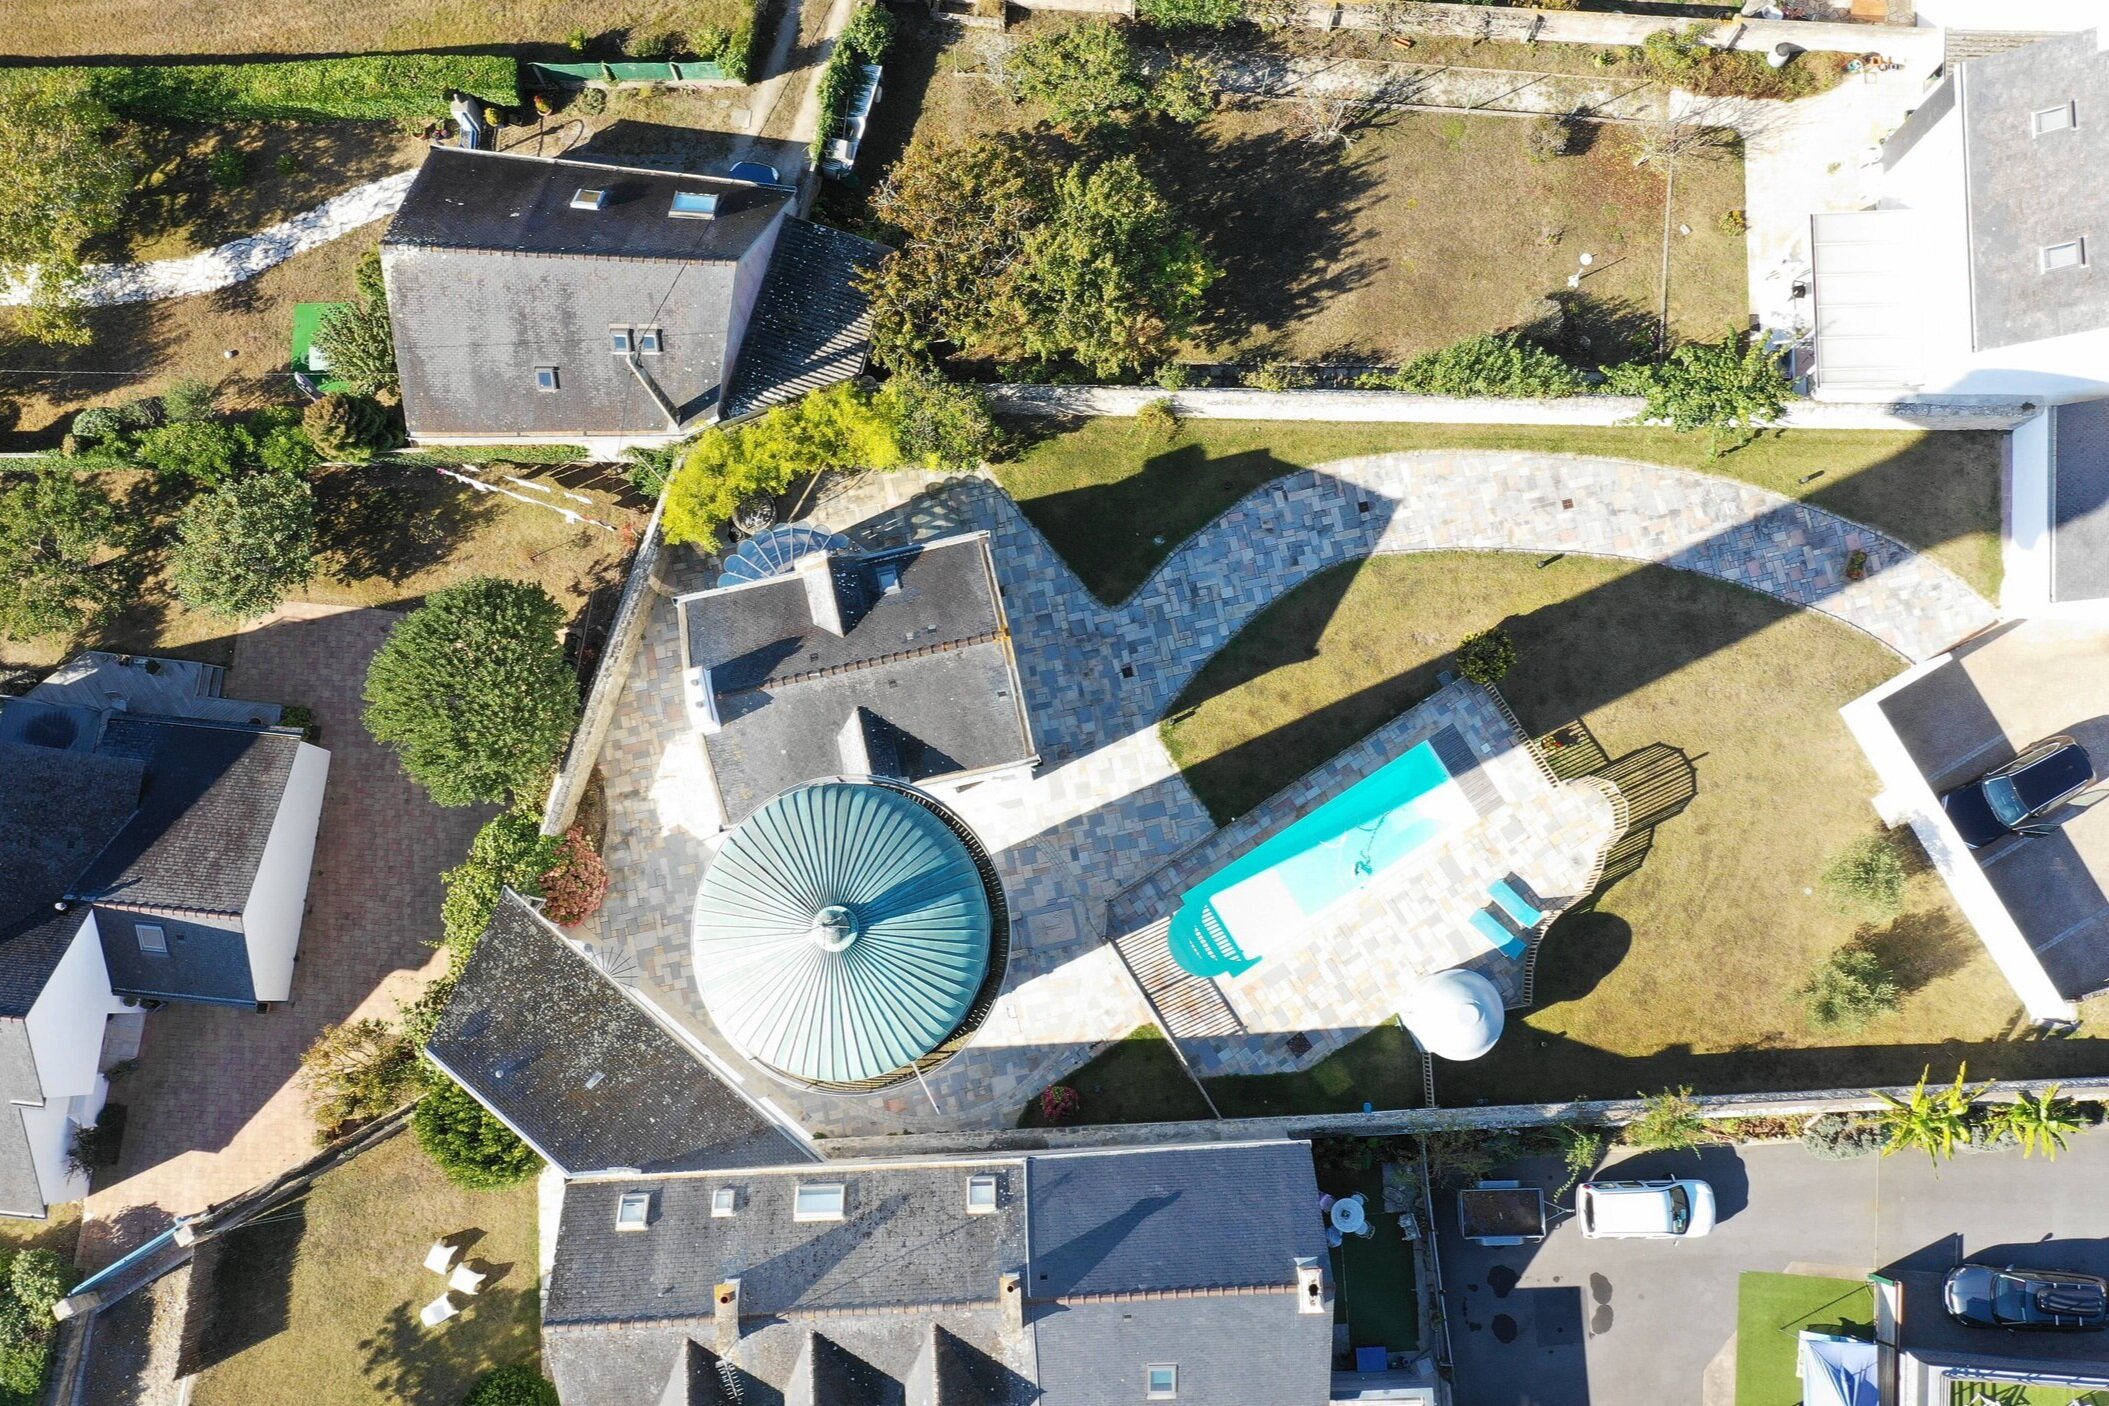 The property from the air